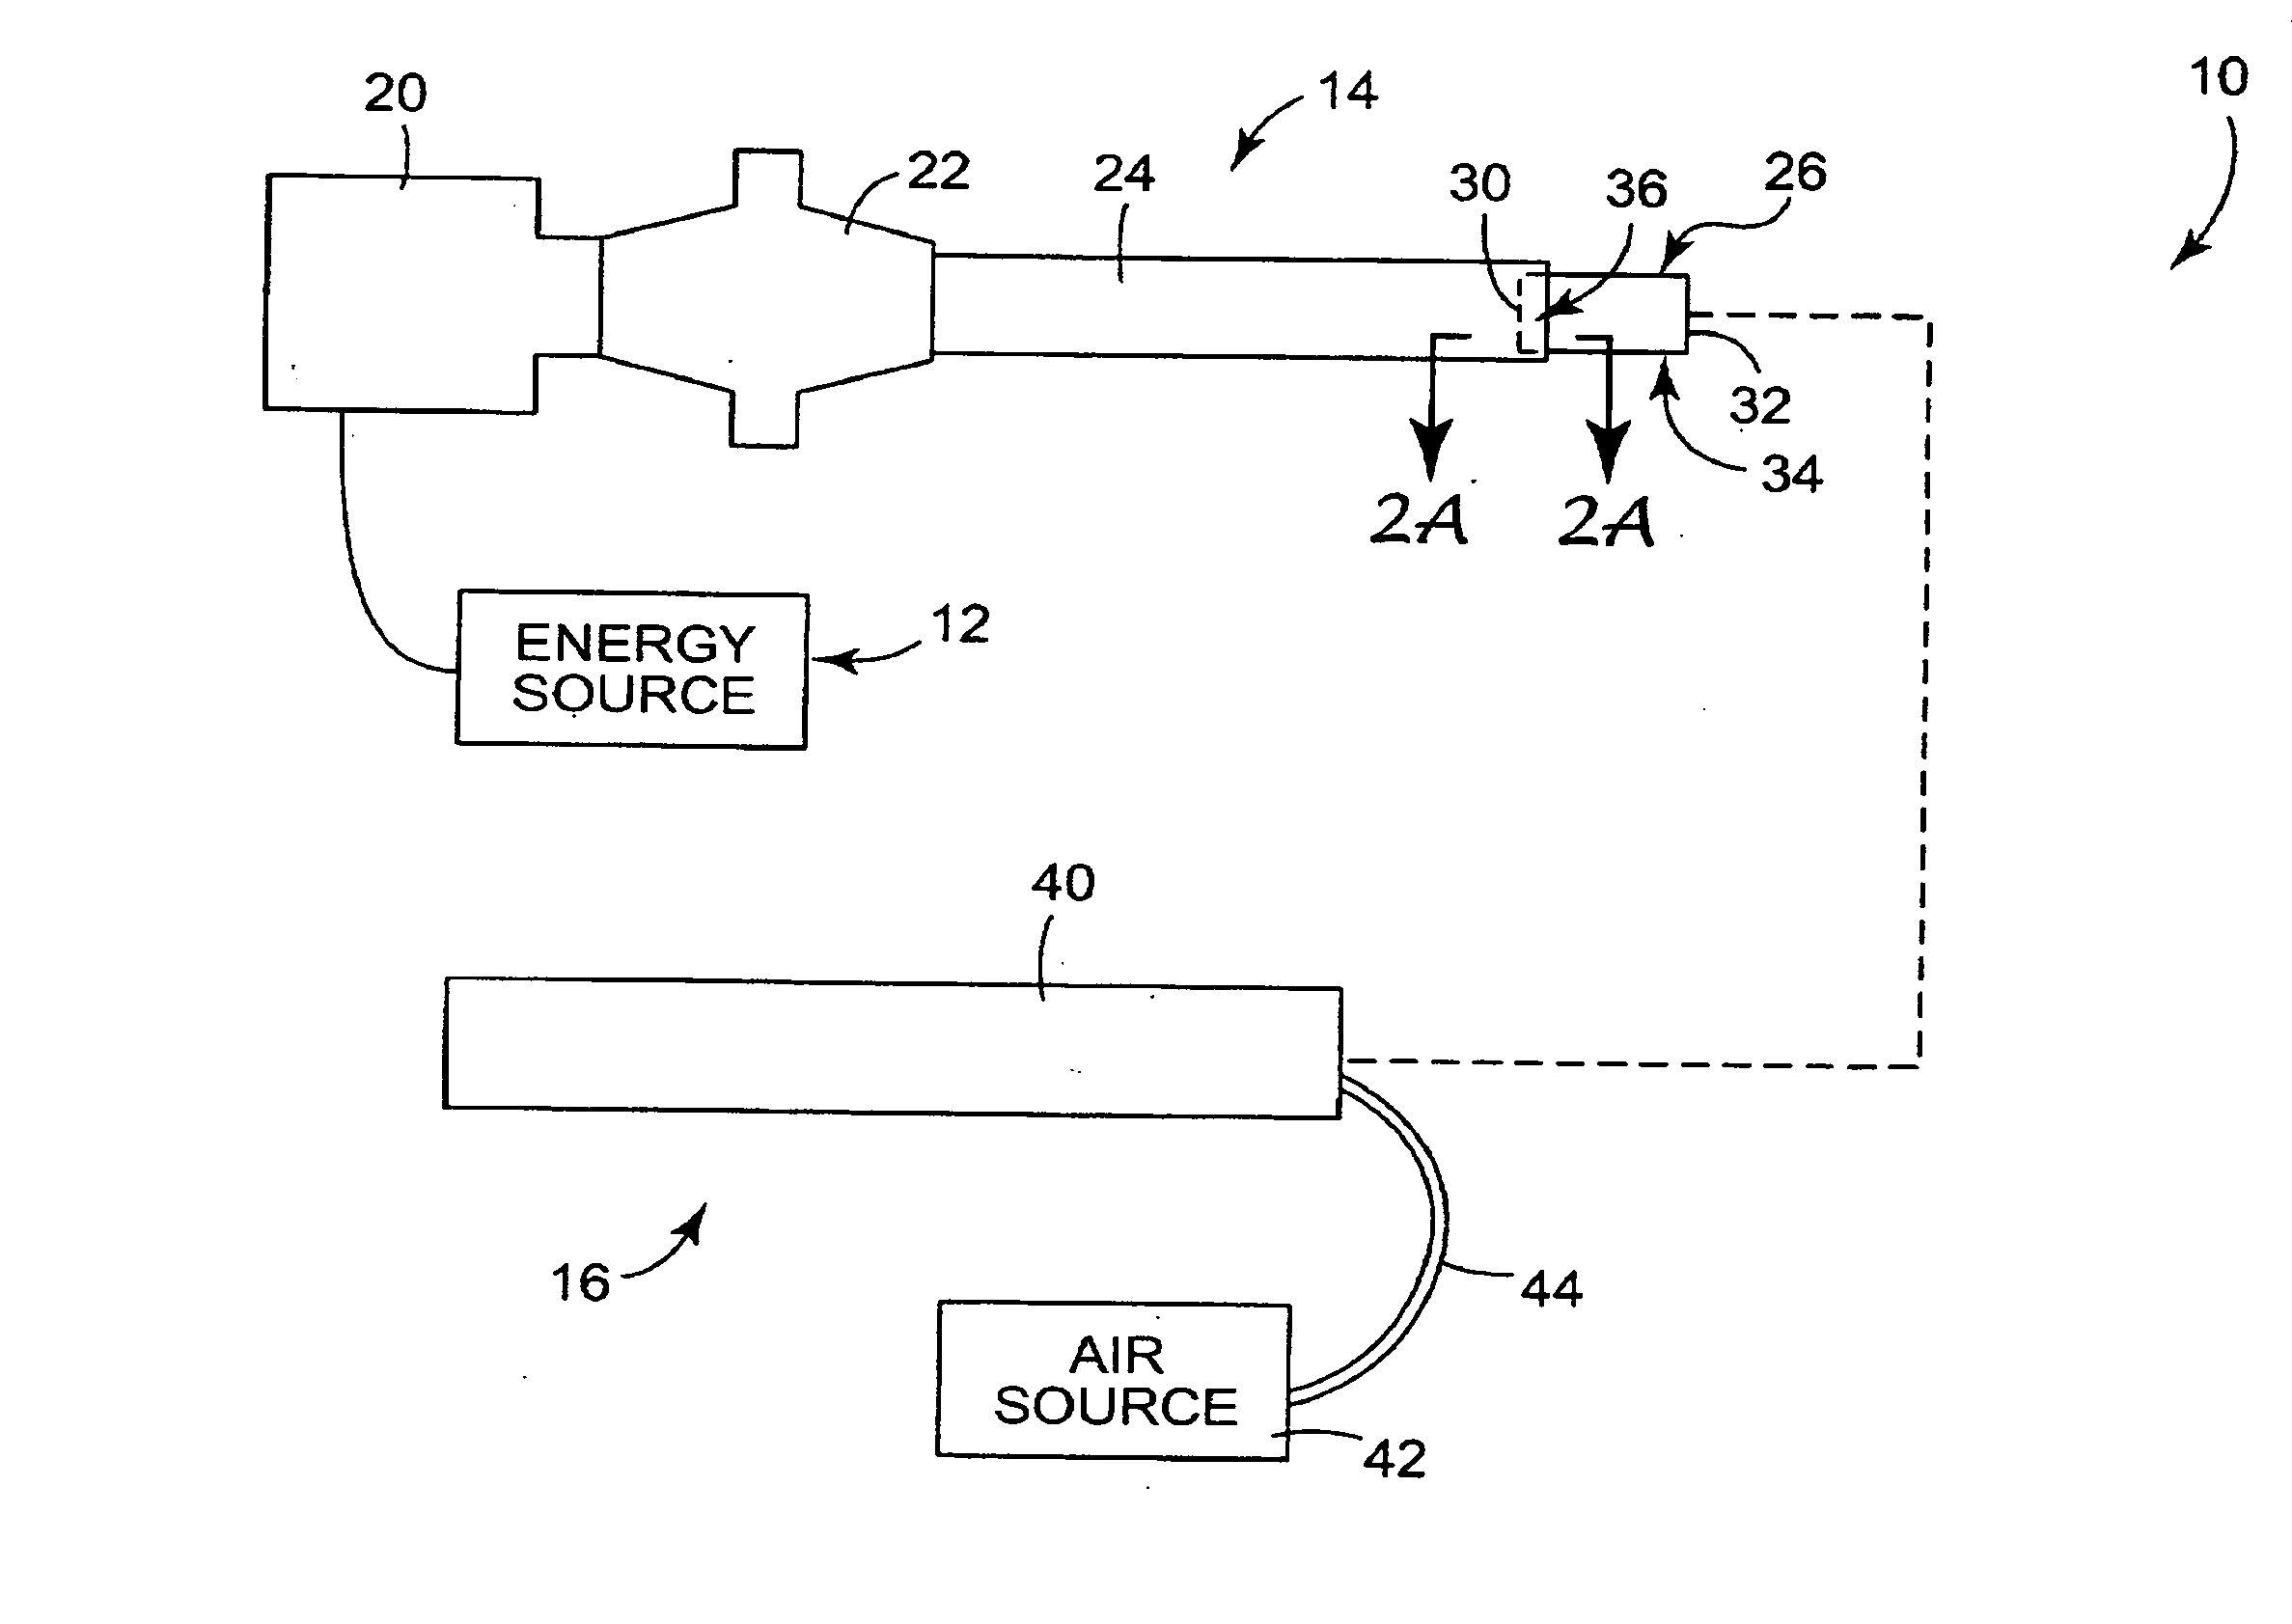 Ultrasonic energy system and method including a ceramic horn